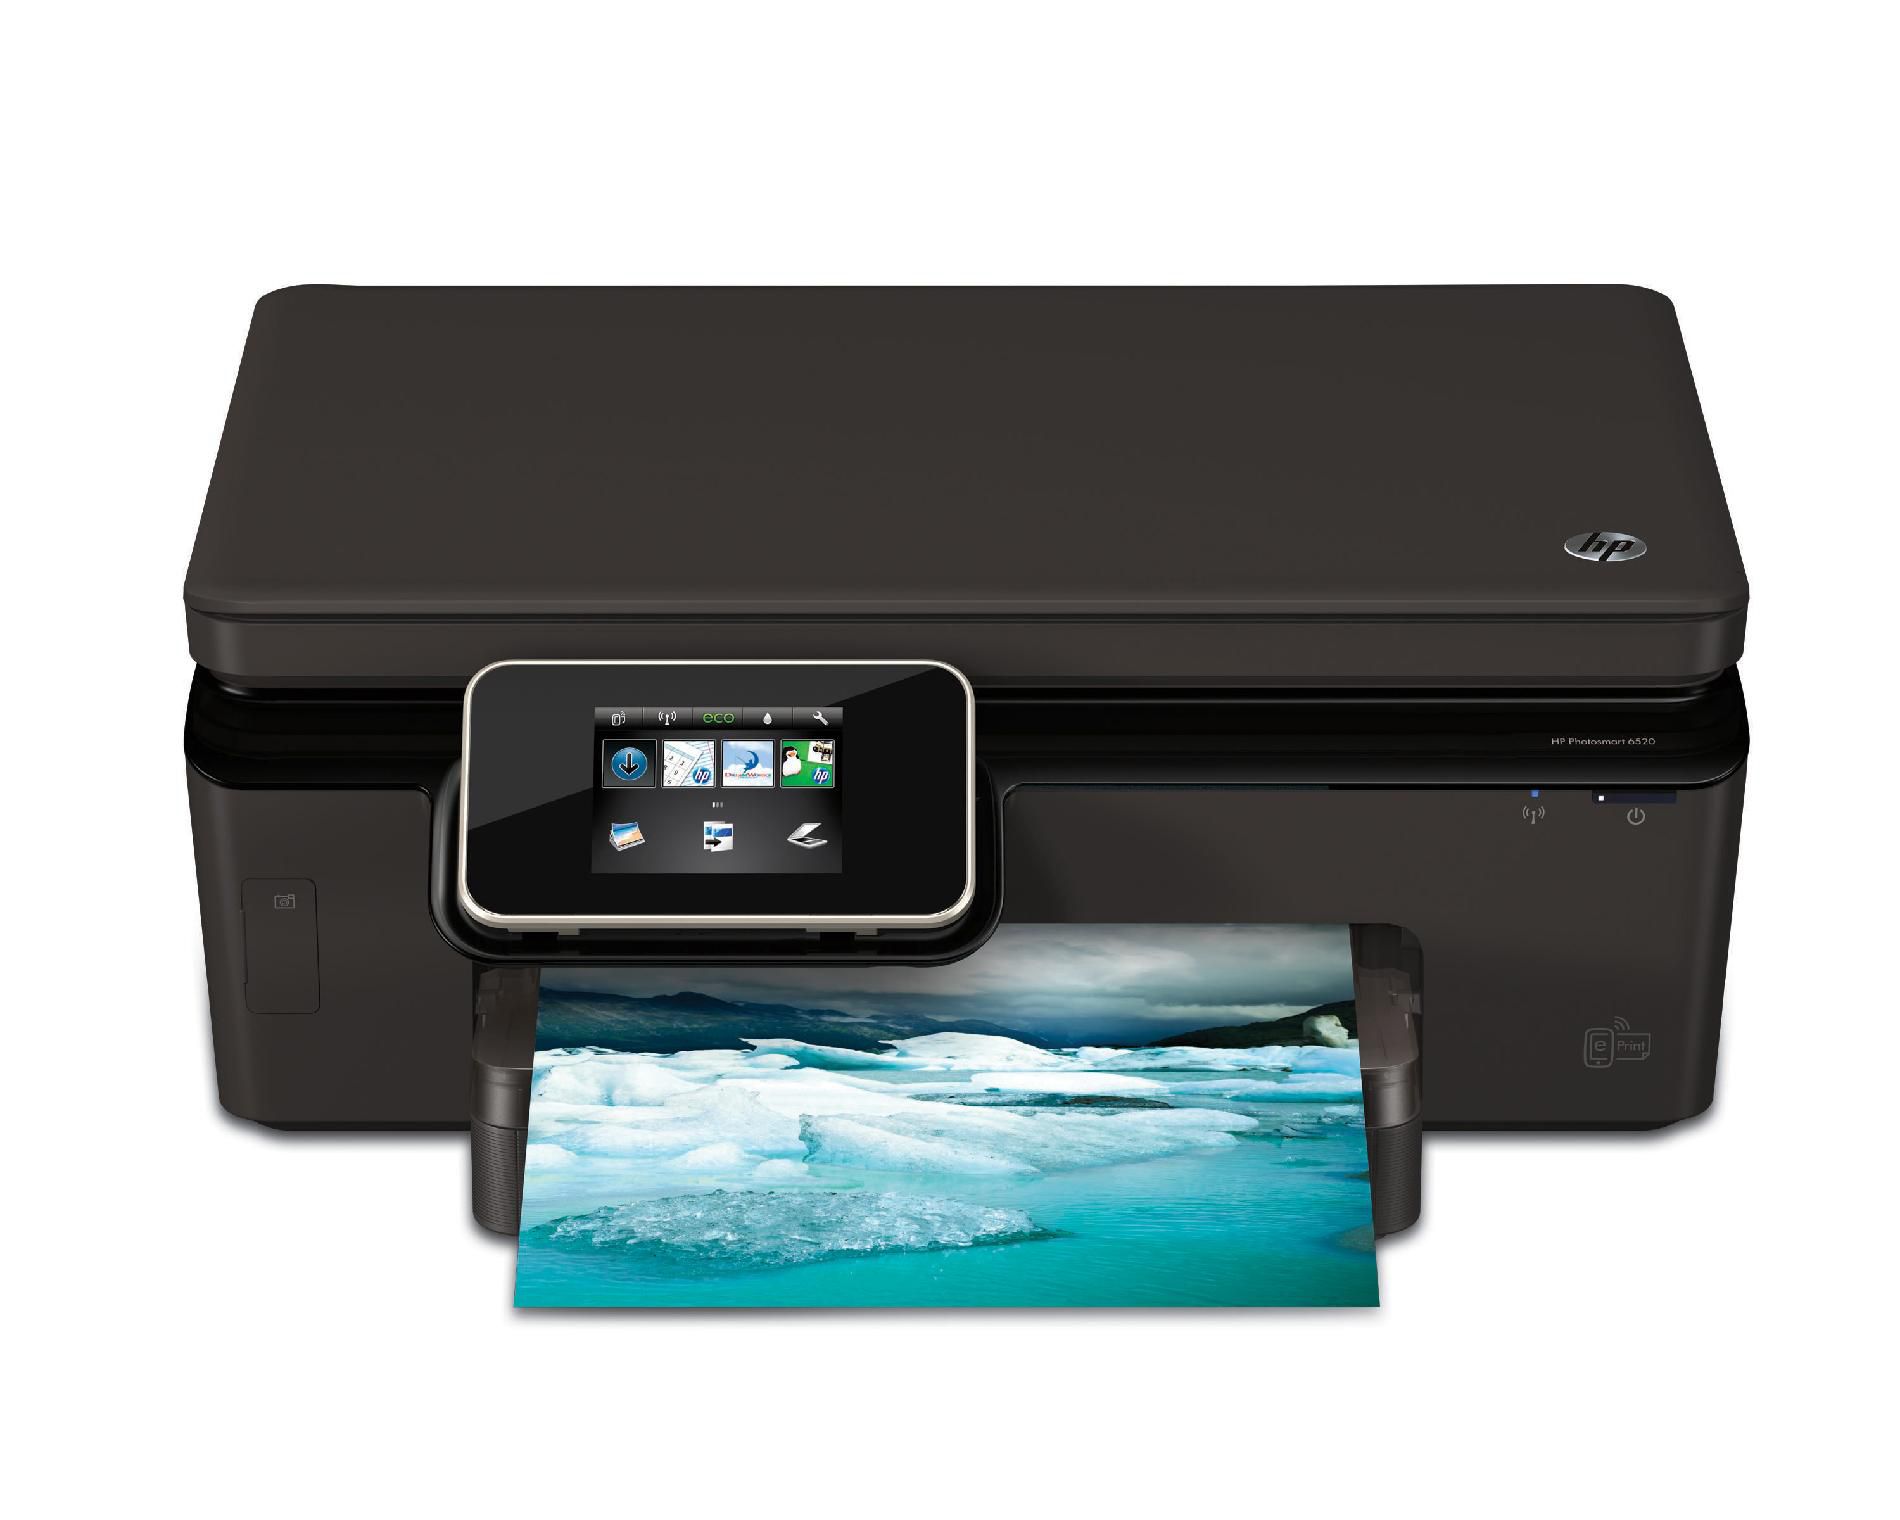 Photosmart 6520 Printer / e-All-in-One's 3.45-inch gesture-enabled touchscreen & automatic photo paper tray